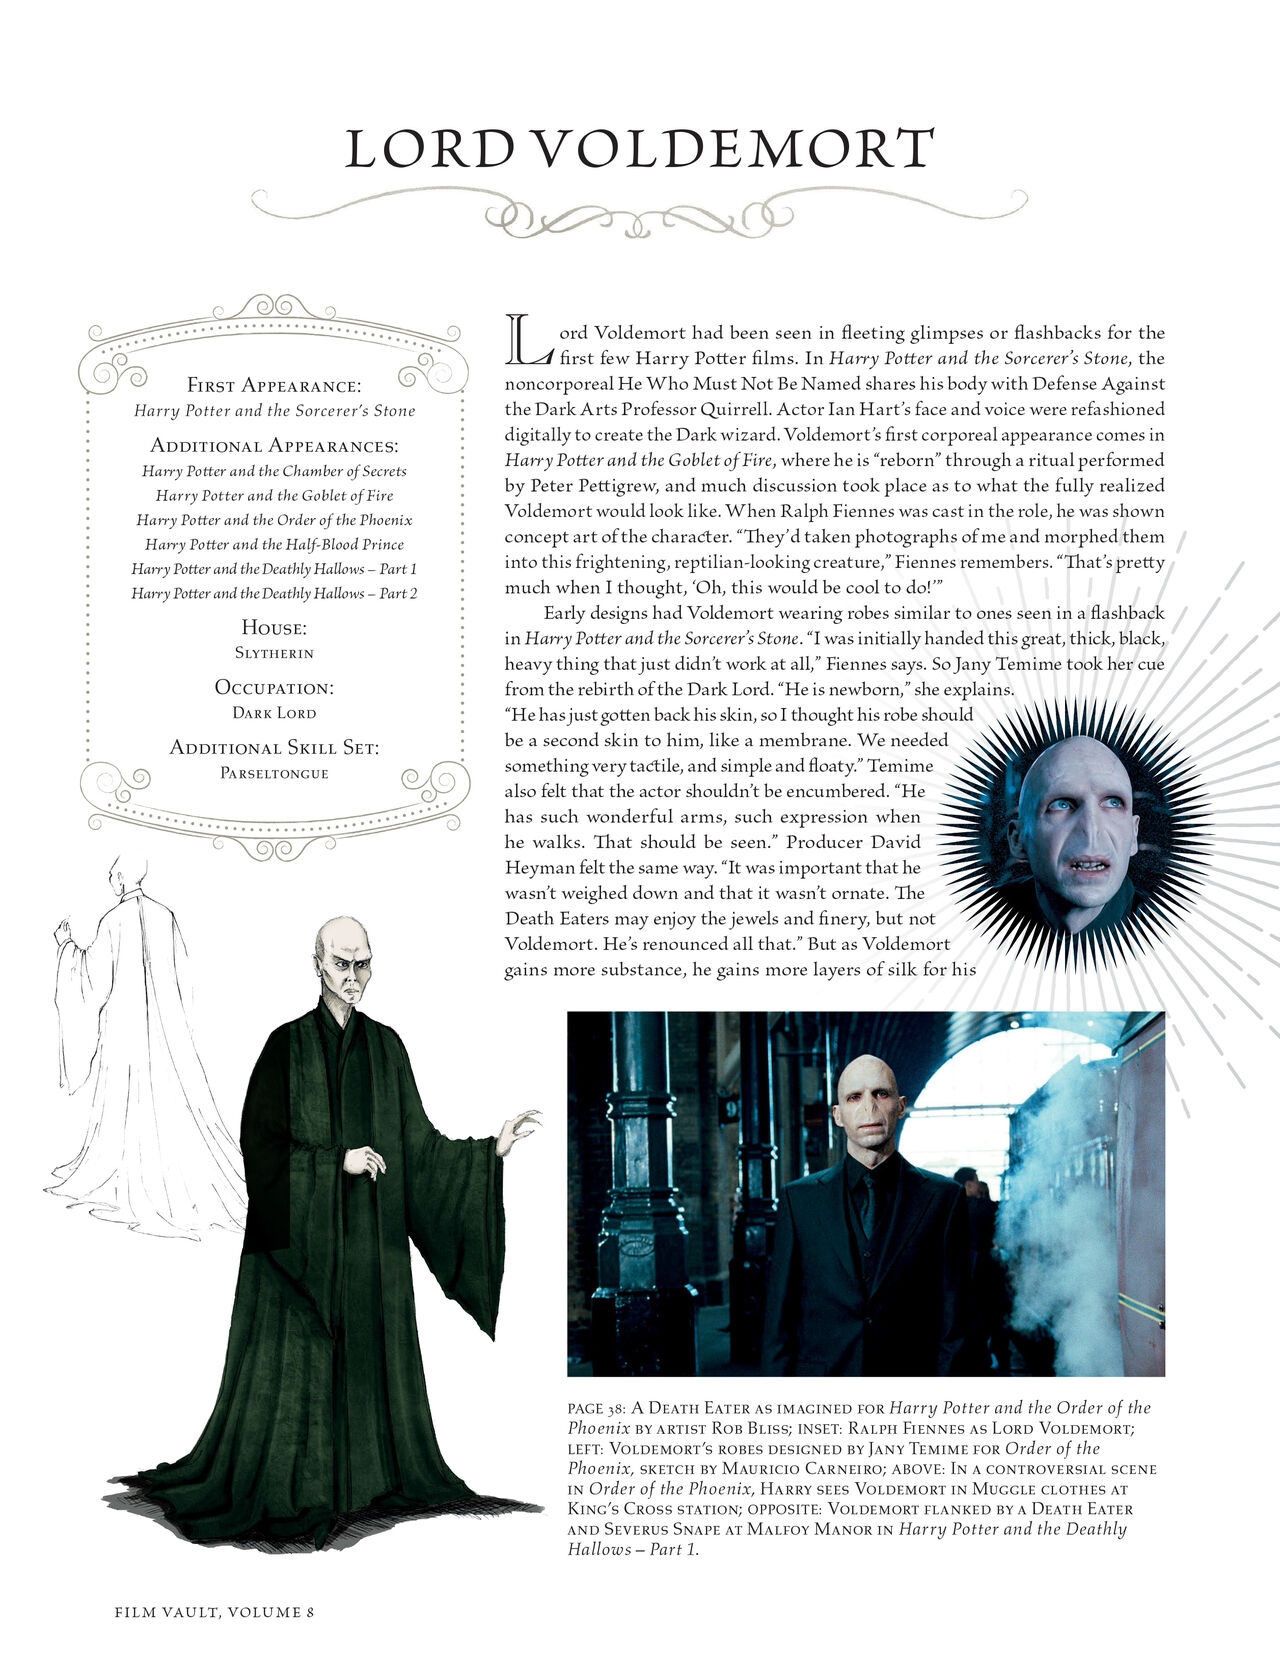 Harry Potter - Film Vault v08 - The Order of the Phoenix and Dark Forces 37